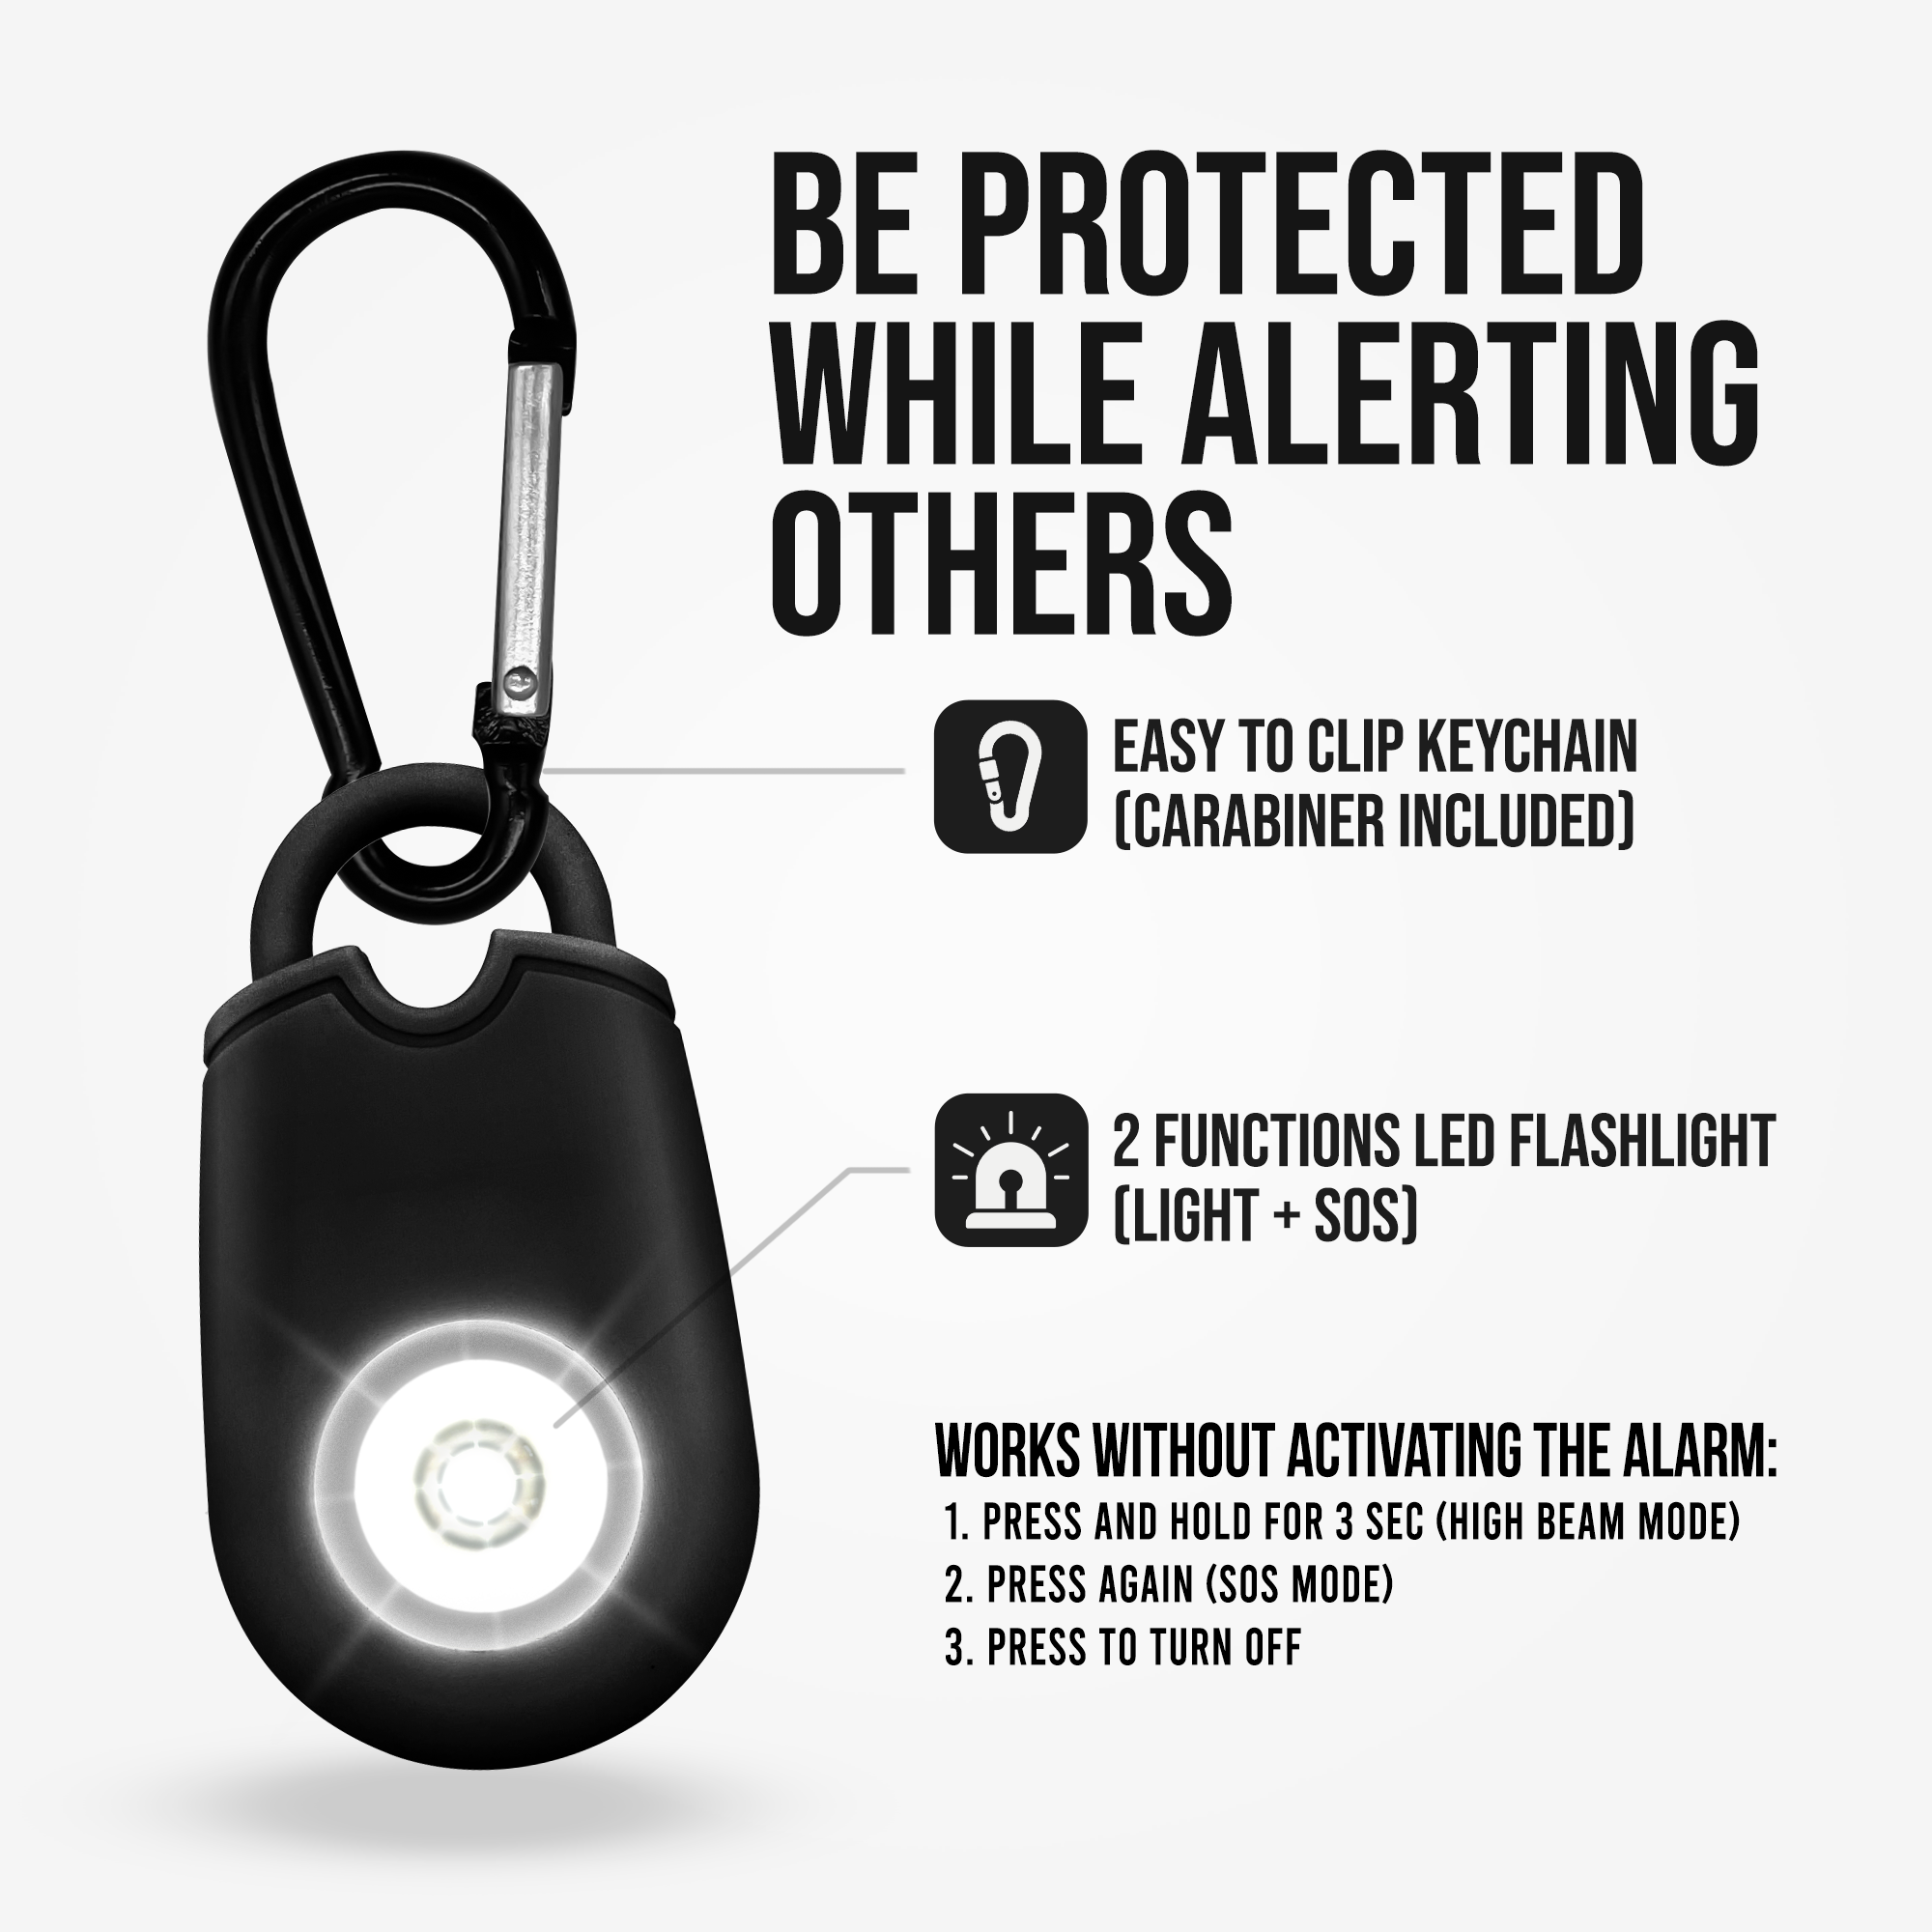 Keychain Alarm with Flashlight (Carabiner Included)